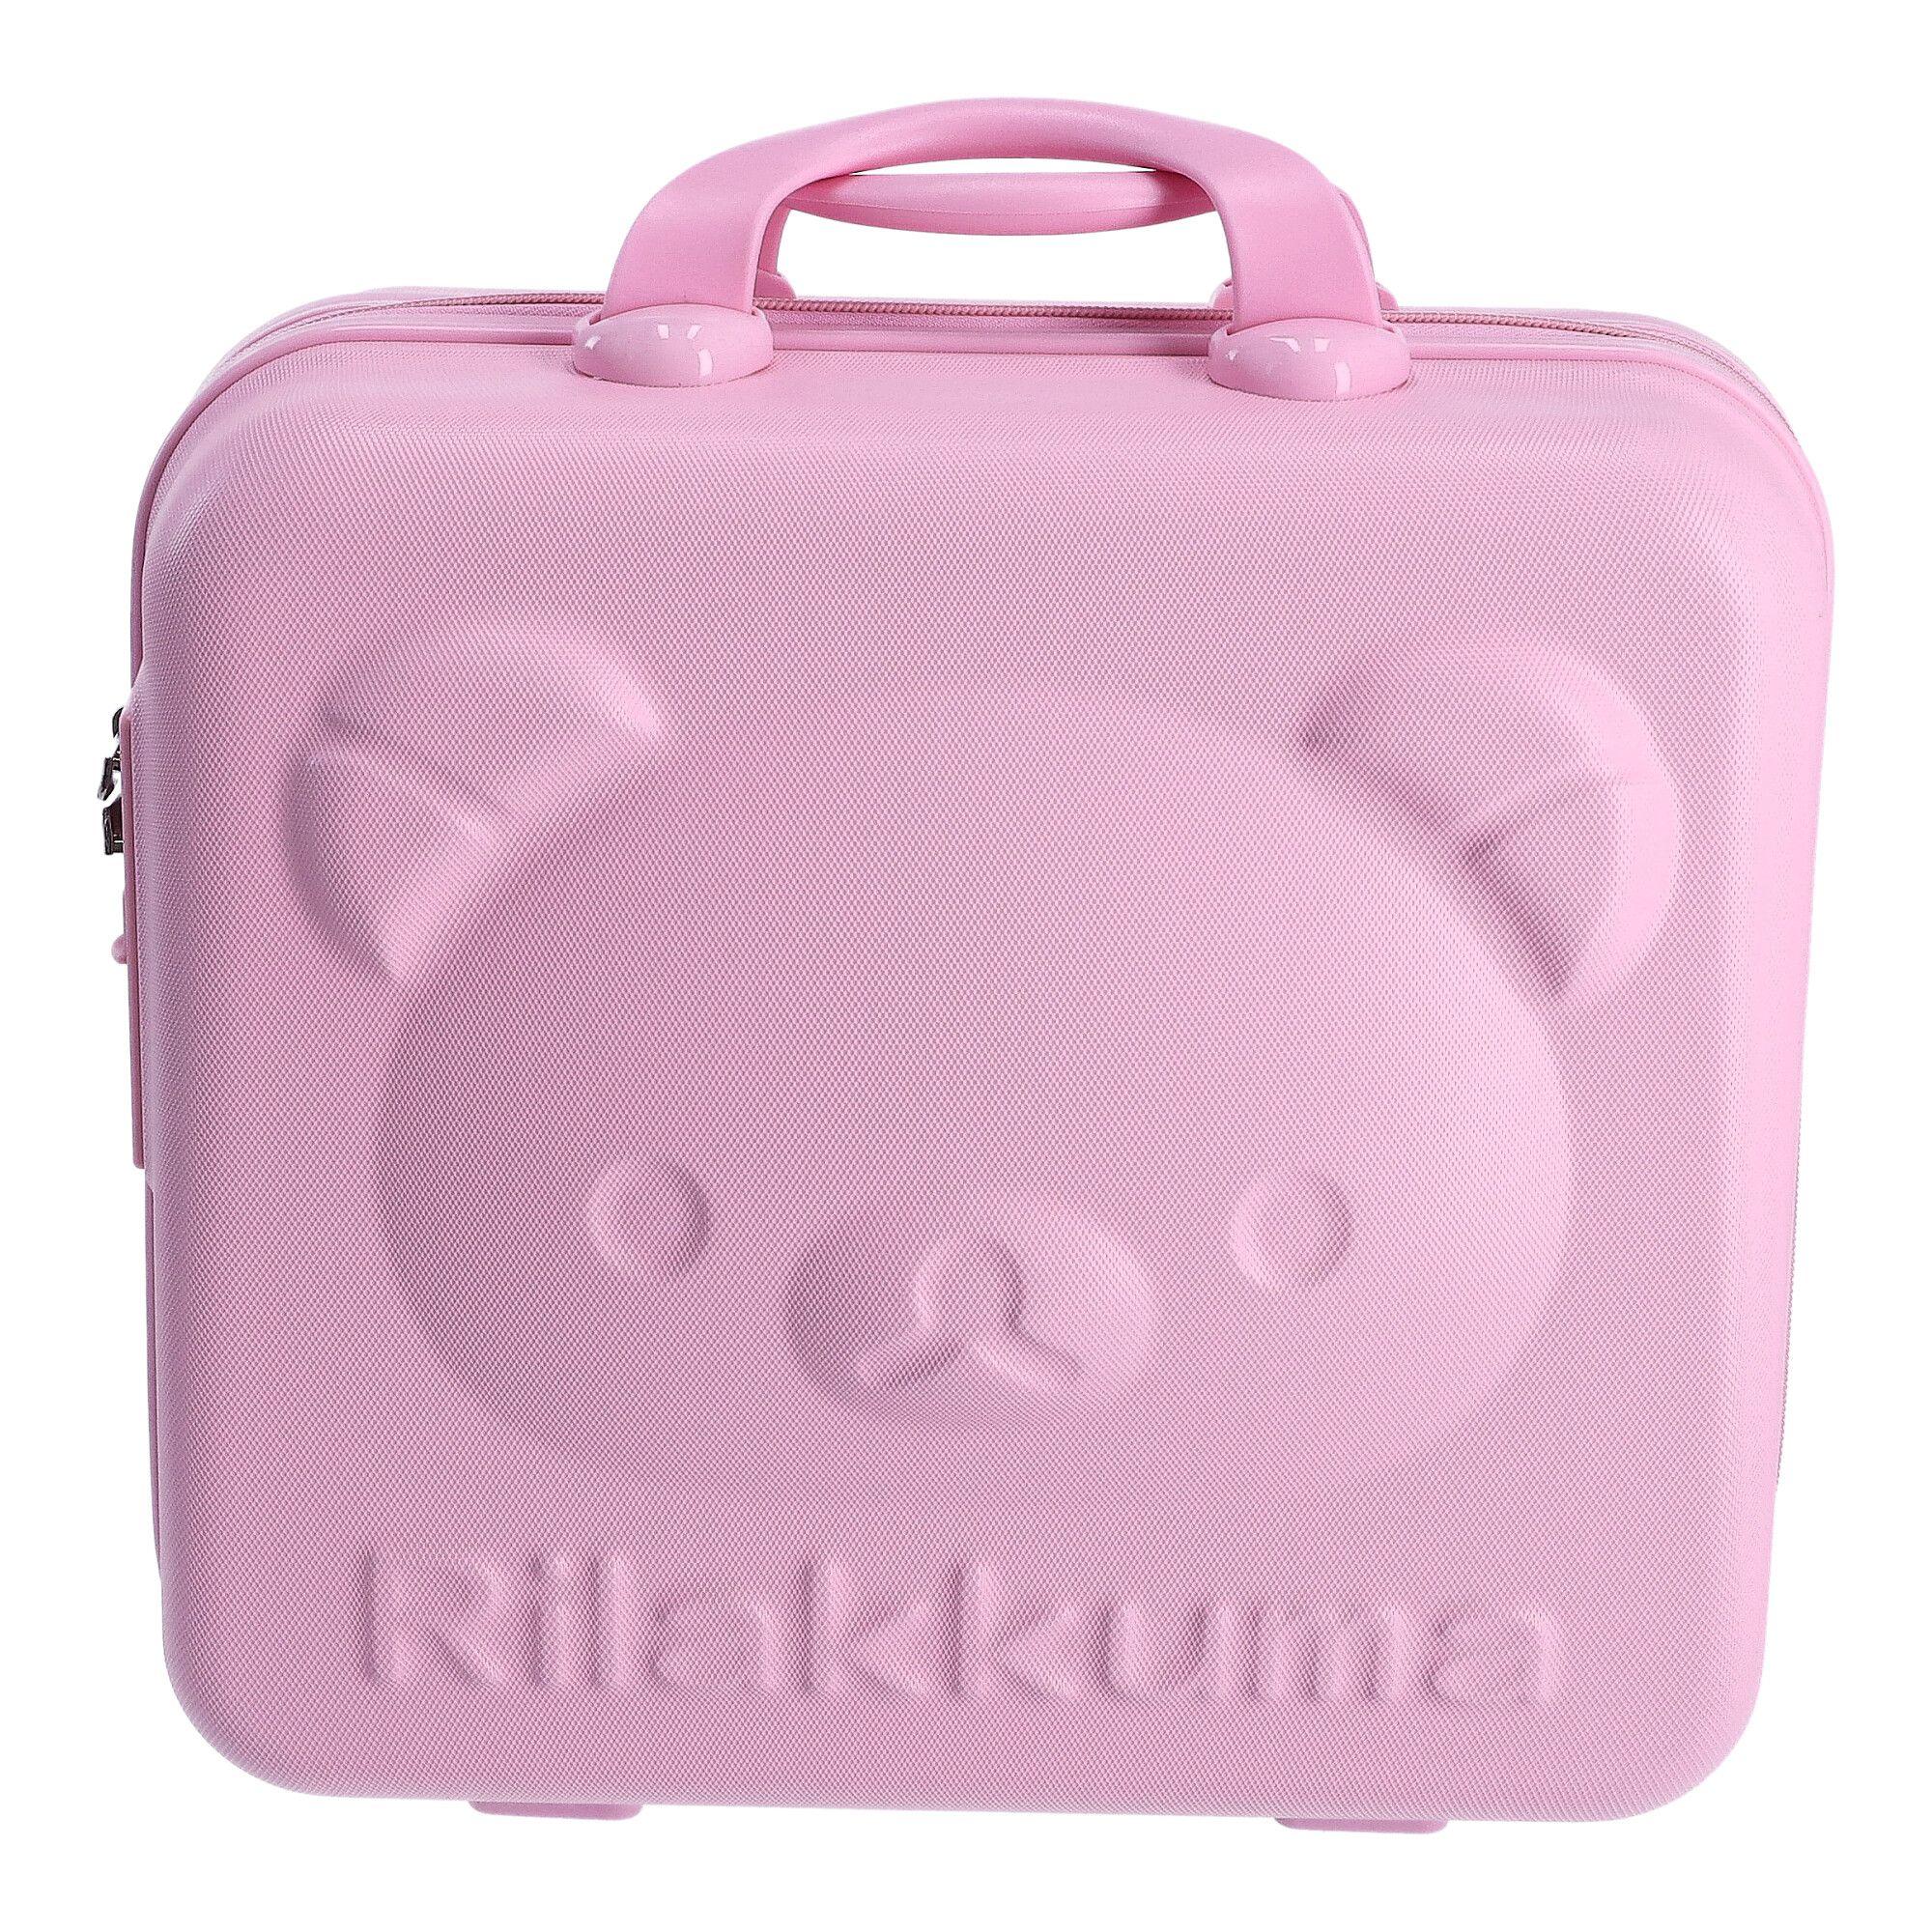 Children's luggage / Lovely travel cosmetic bag - pink